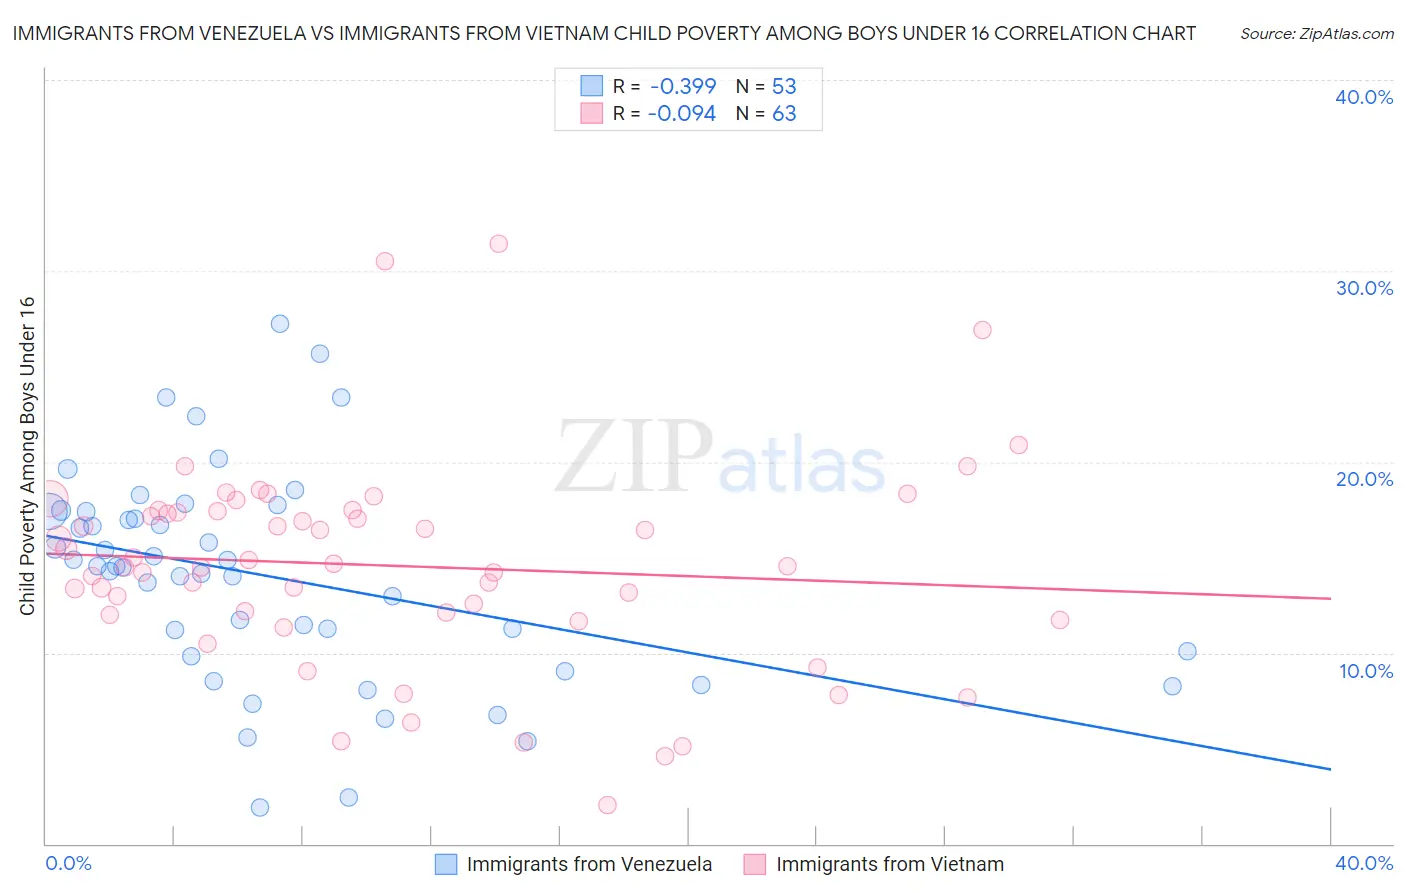 Immigrants from Venezuela vs Immigrants from Vietnam Child Poverty Among Boys Under 16